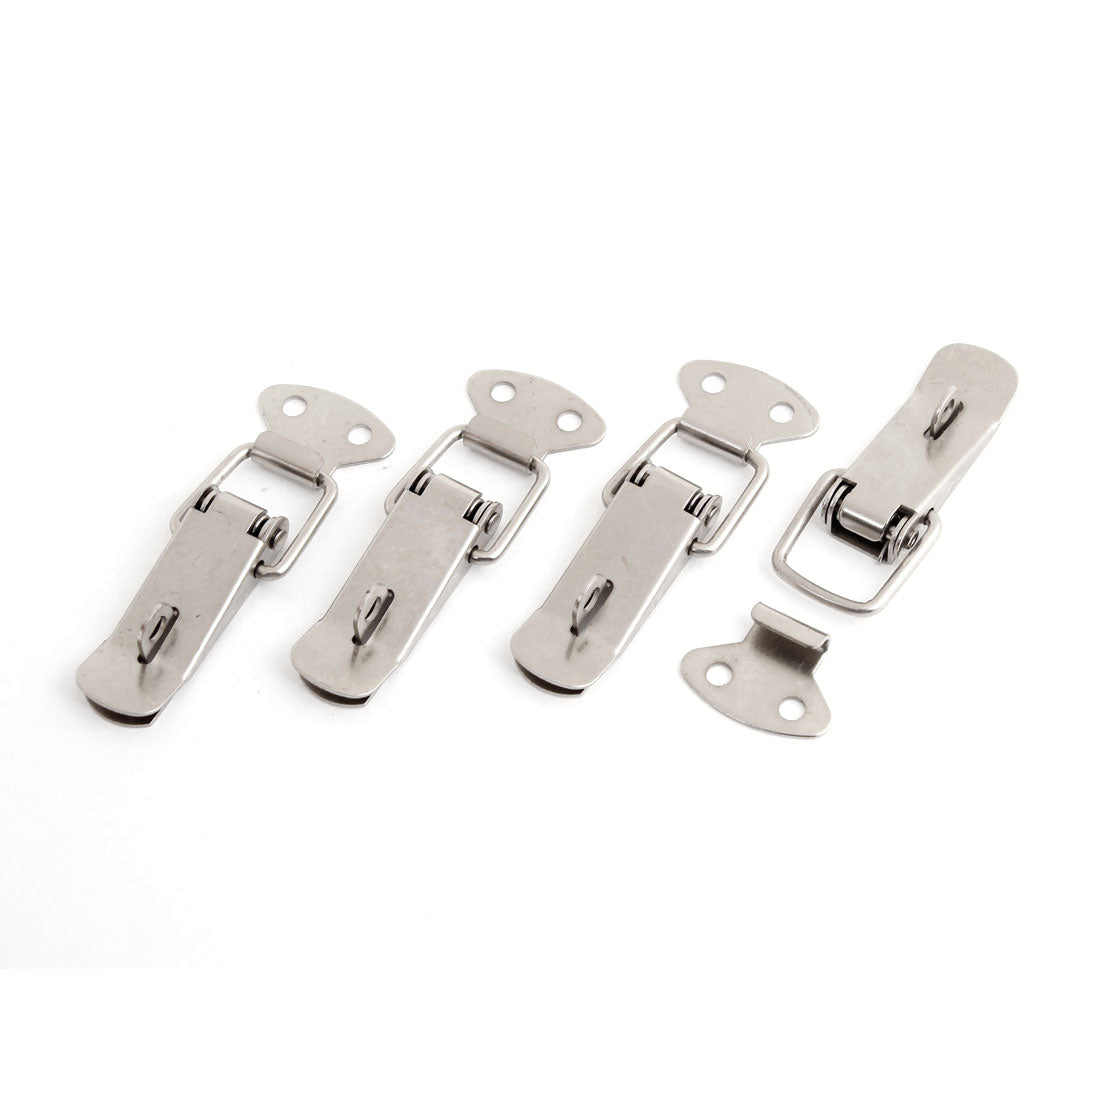 uxcell Uxcell 4.4cm Long Spring Loaded Fittings Toggle Latch Catch 4 Set